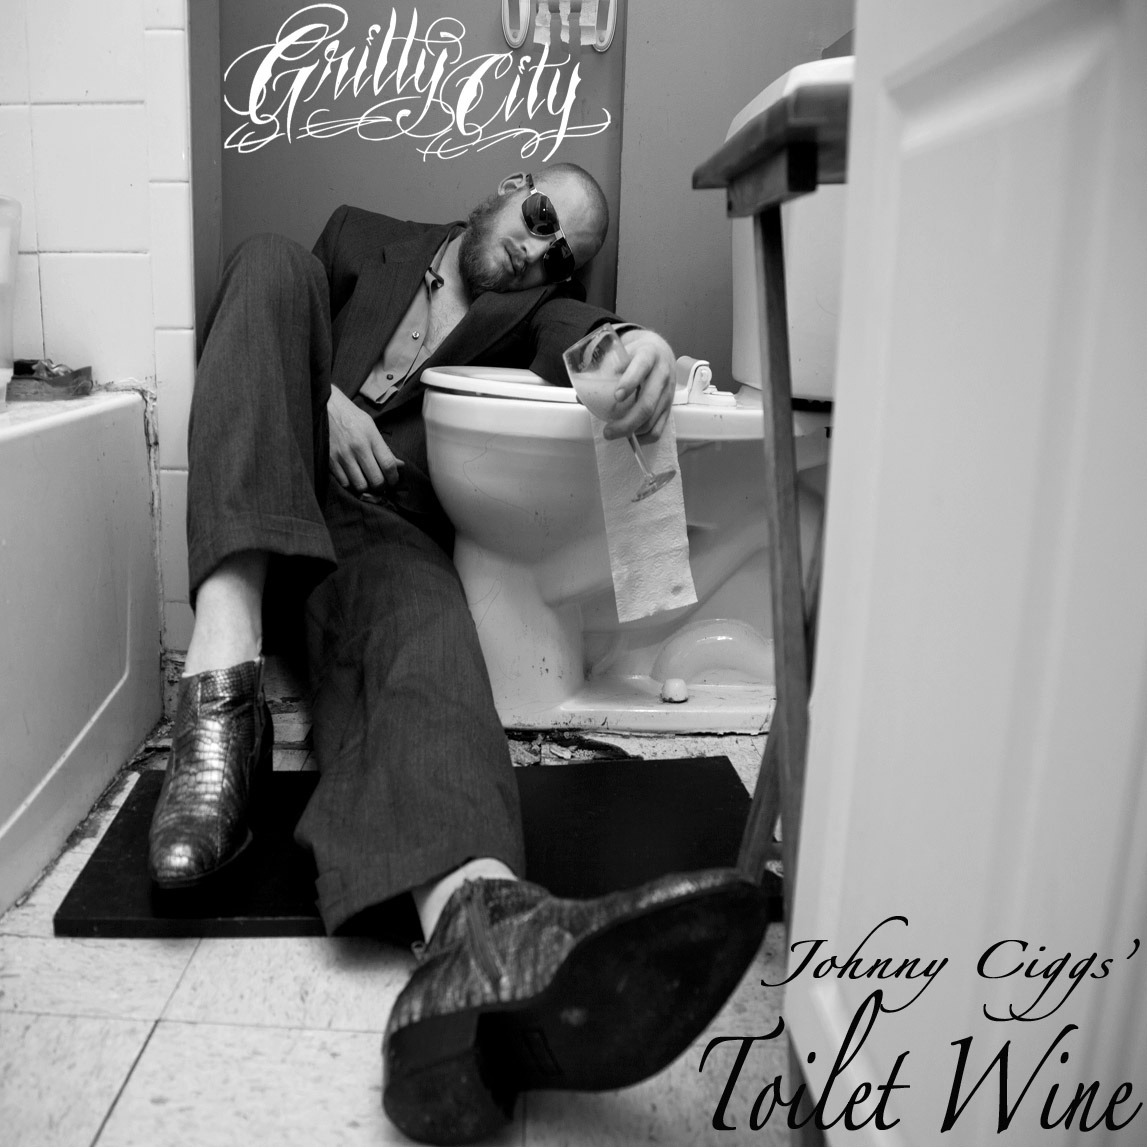 CLICK HERE TO LISTEN TO TOILET WINE BY GRITTY CITY RECORDS